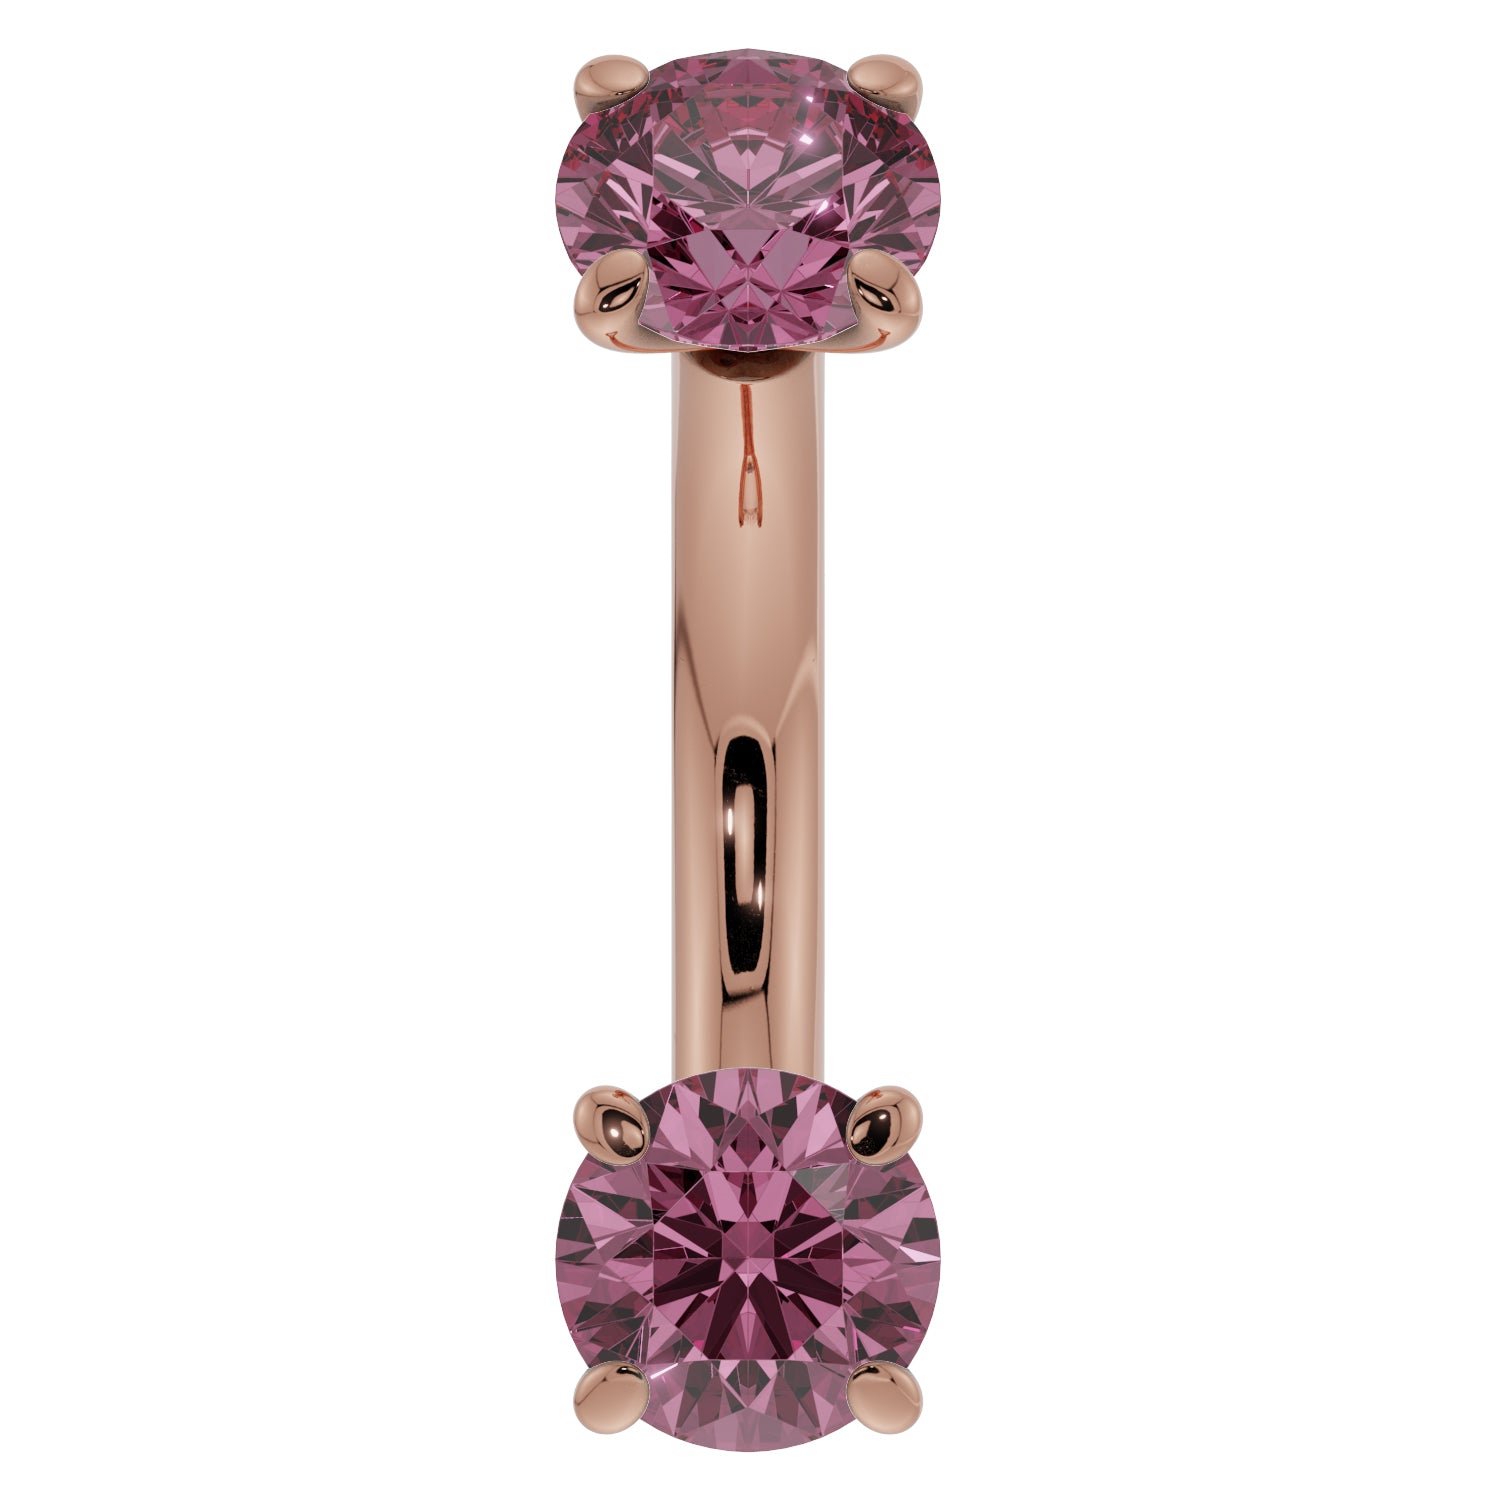 Pink Sapphire Prong-Set Eyebrow Rook Belly Curved Barbell-14K Rose Gold   14G (1.6mm) (Belly Ring)   7 16